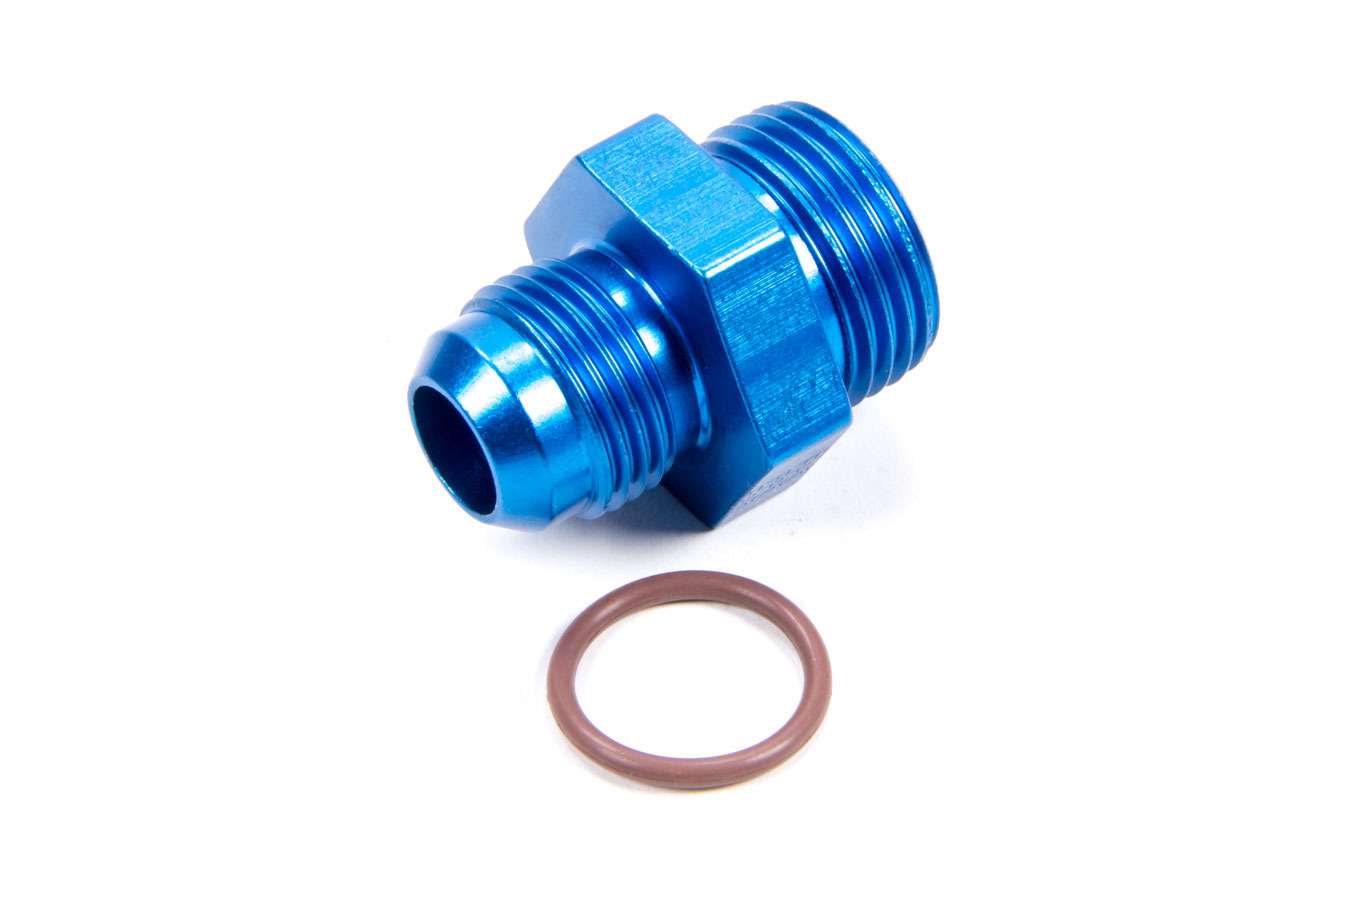 Fragola 495107 Fitting, Adapter, Straight, 10 AN Male to 12 AN Male O-Ring, Aluminum, Blue Anodized, Each